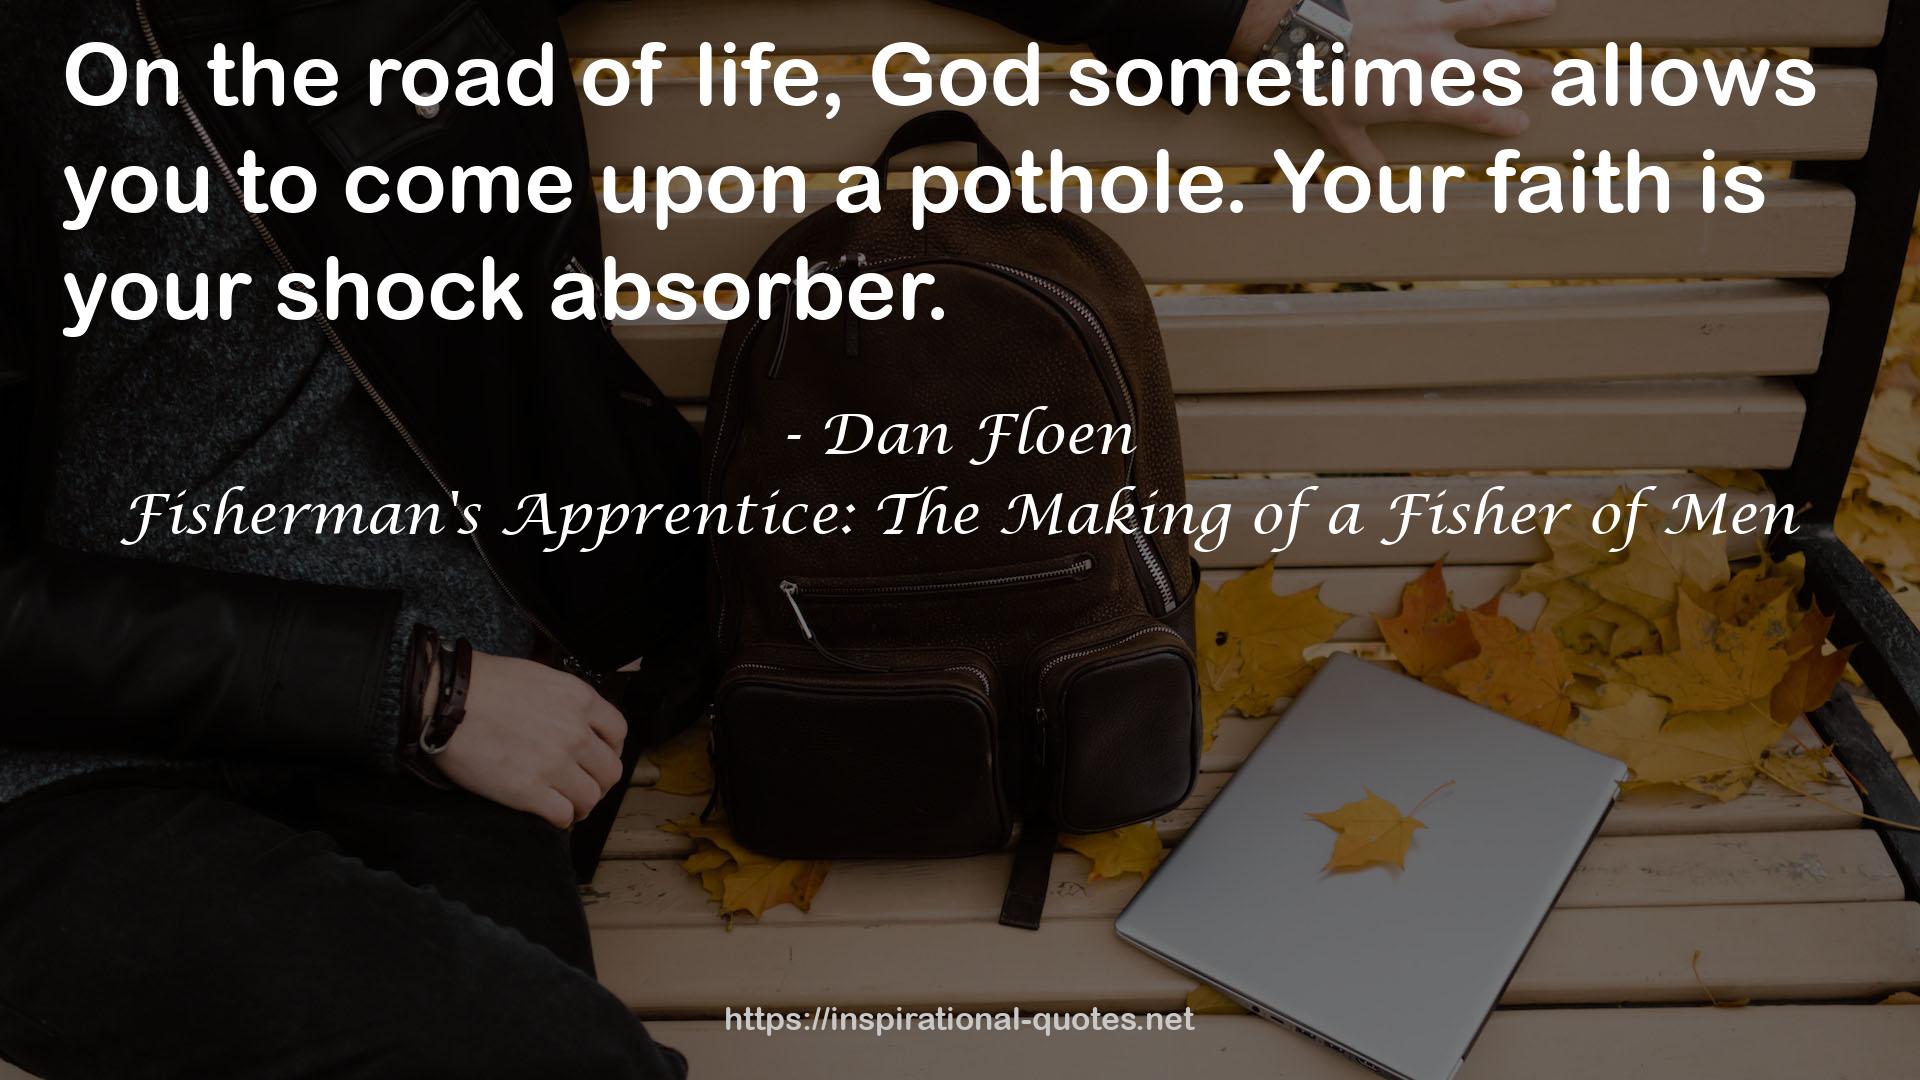 Fisherman's Apprentice: The Making of a Fisher of Men QUOTES